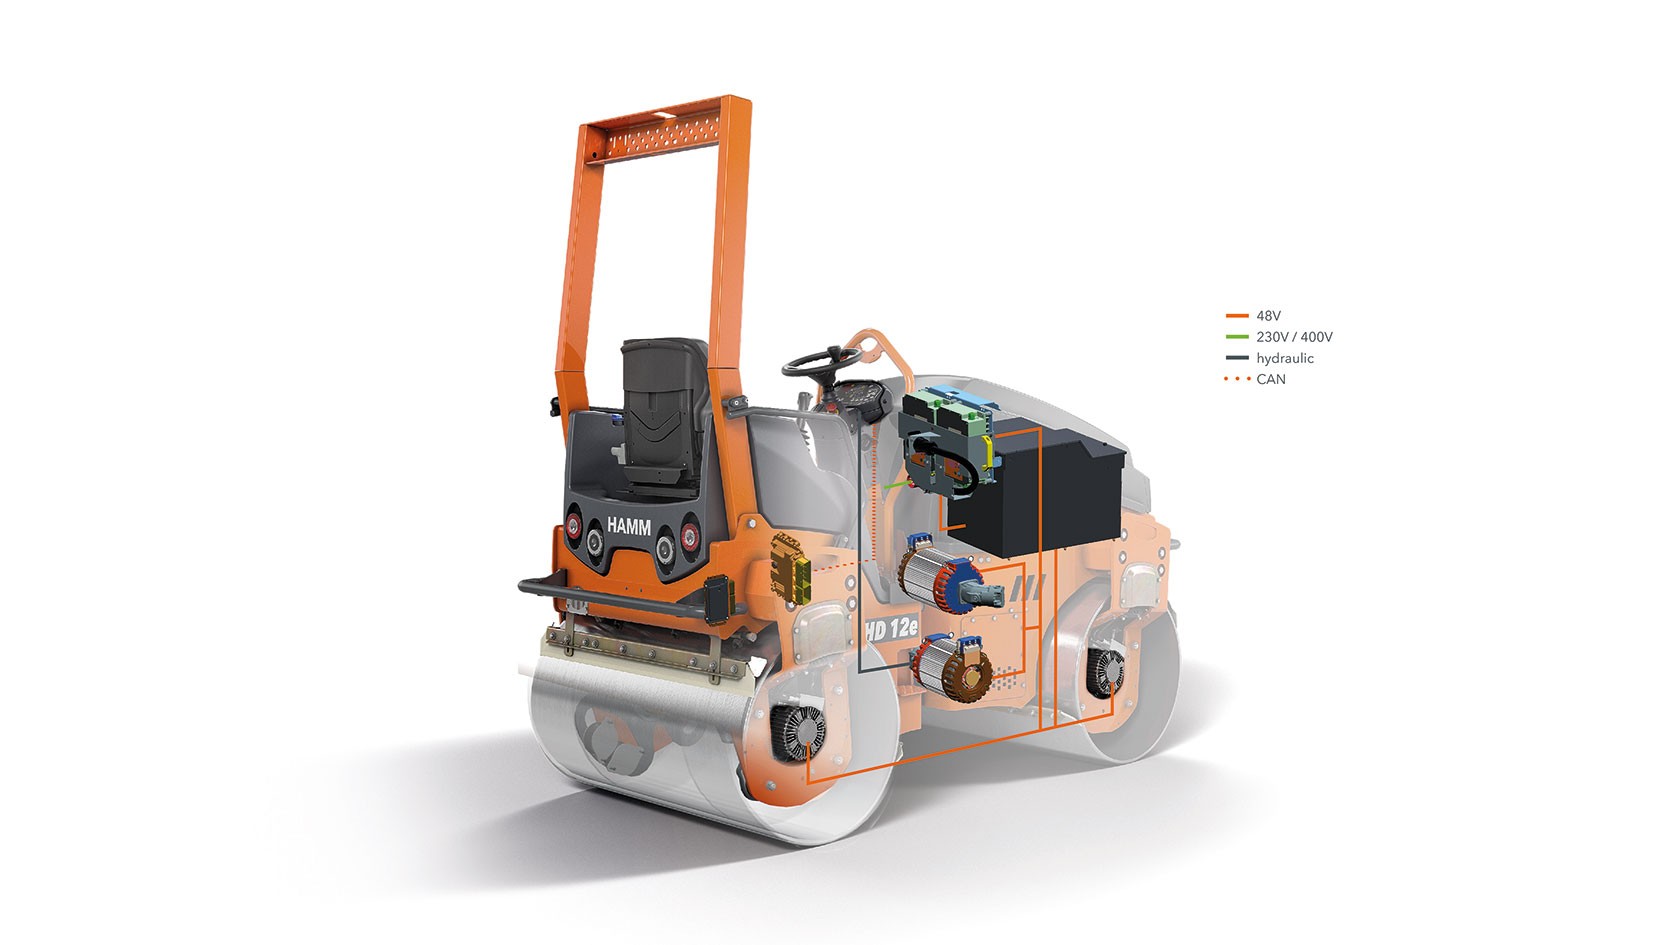 Hamm tandem roller HD 12e with flow diagram of the electric drive